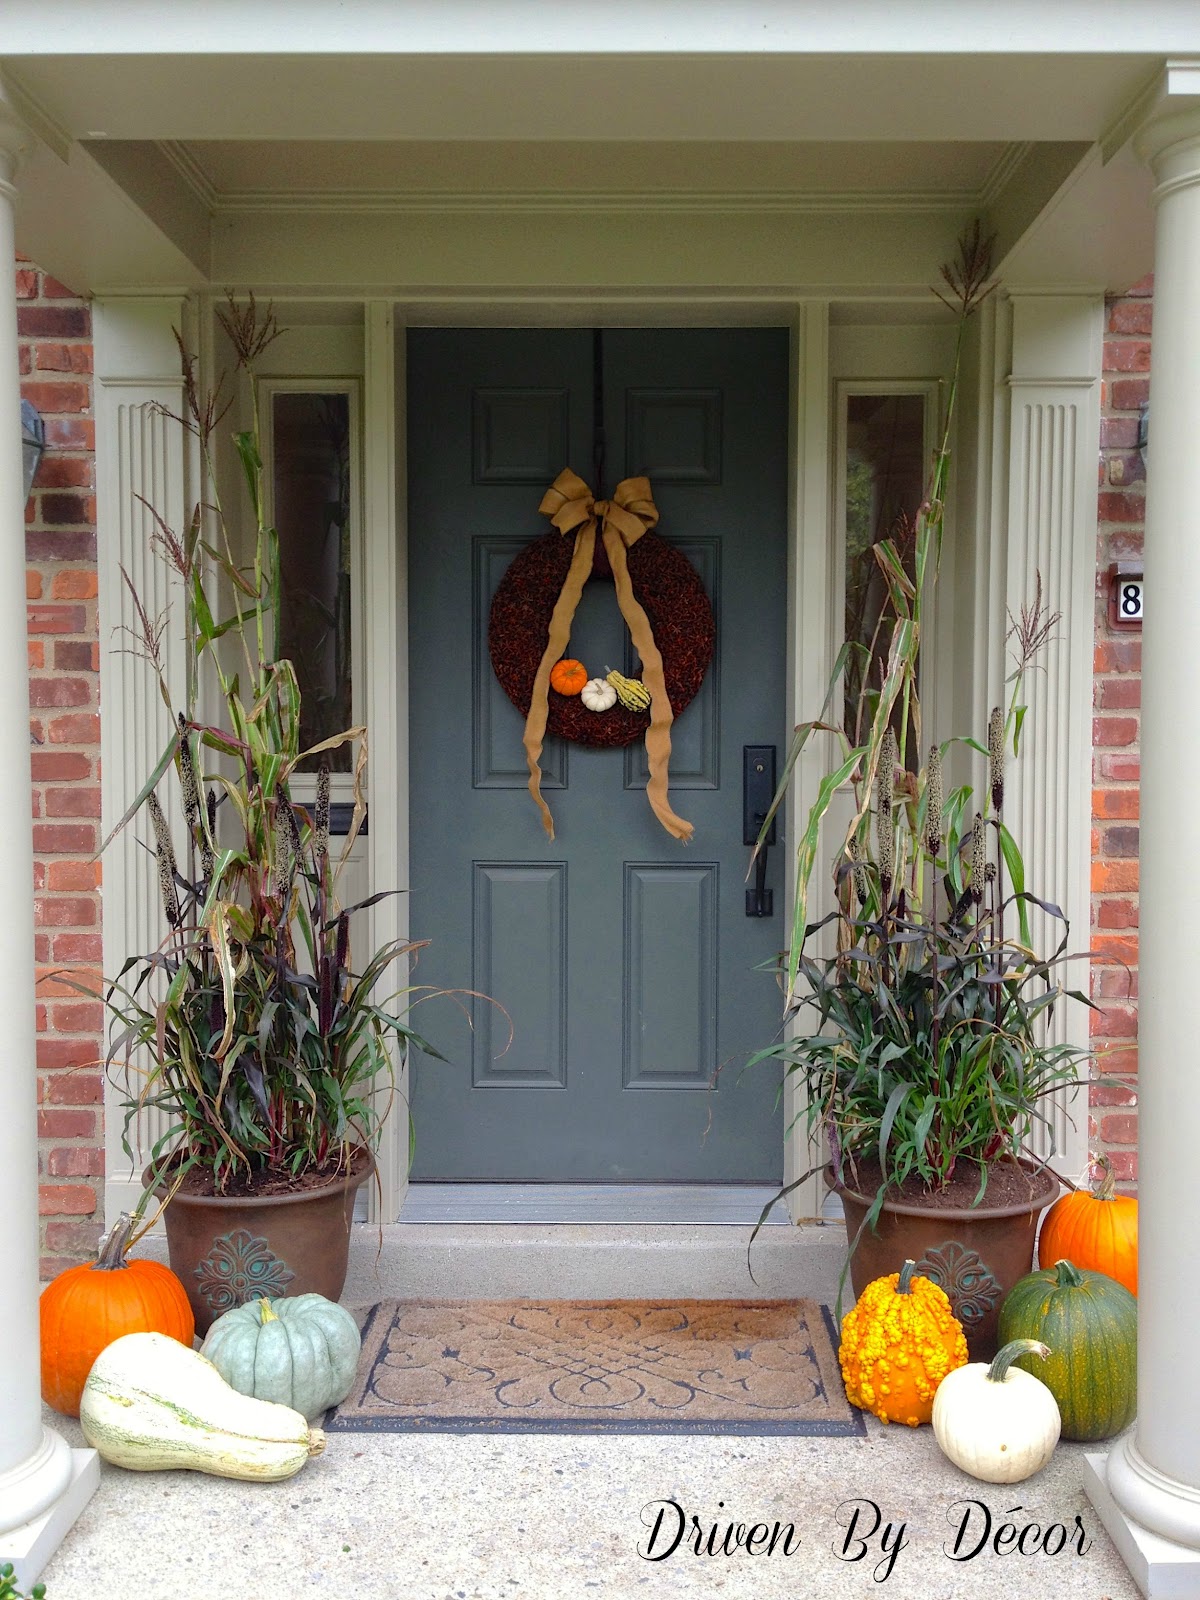 Driven By Décor: Decorating My Front Porch for Fall